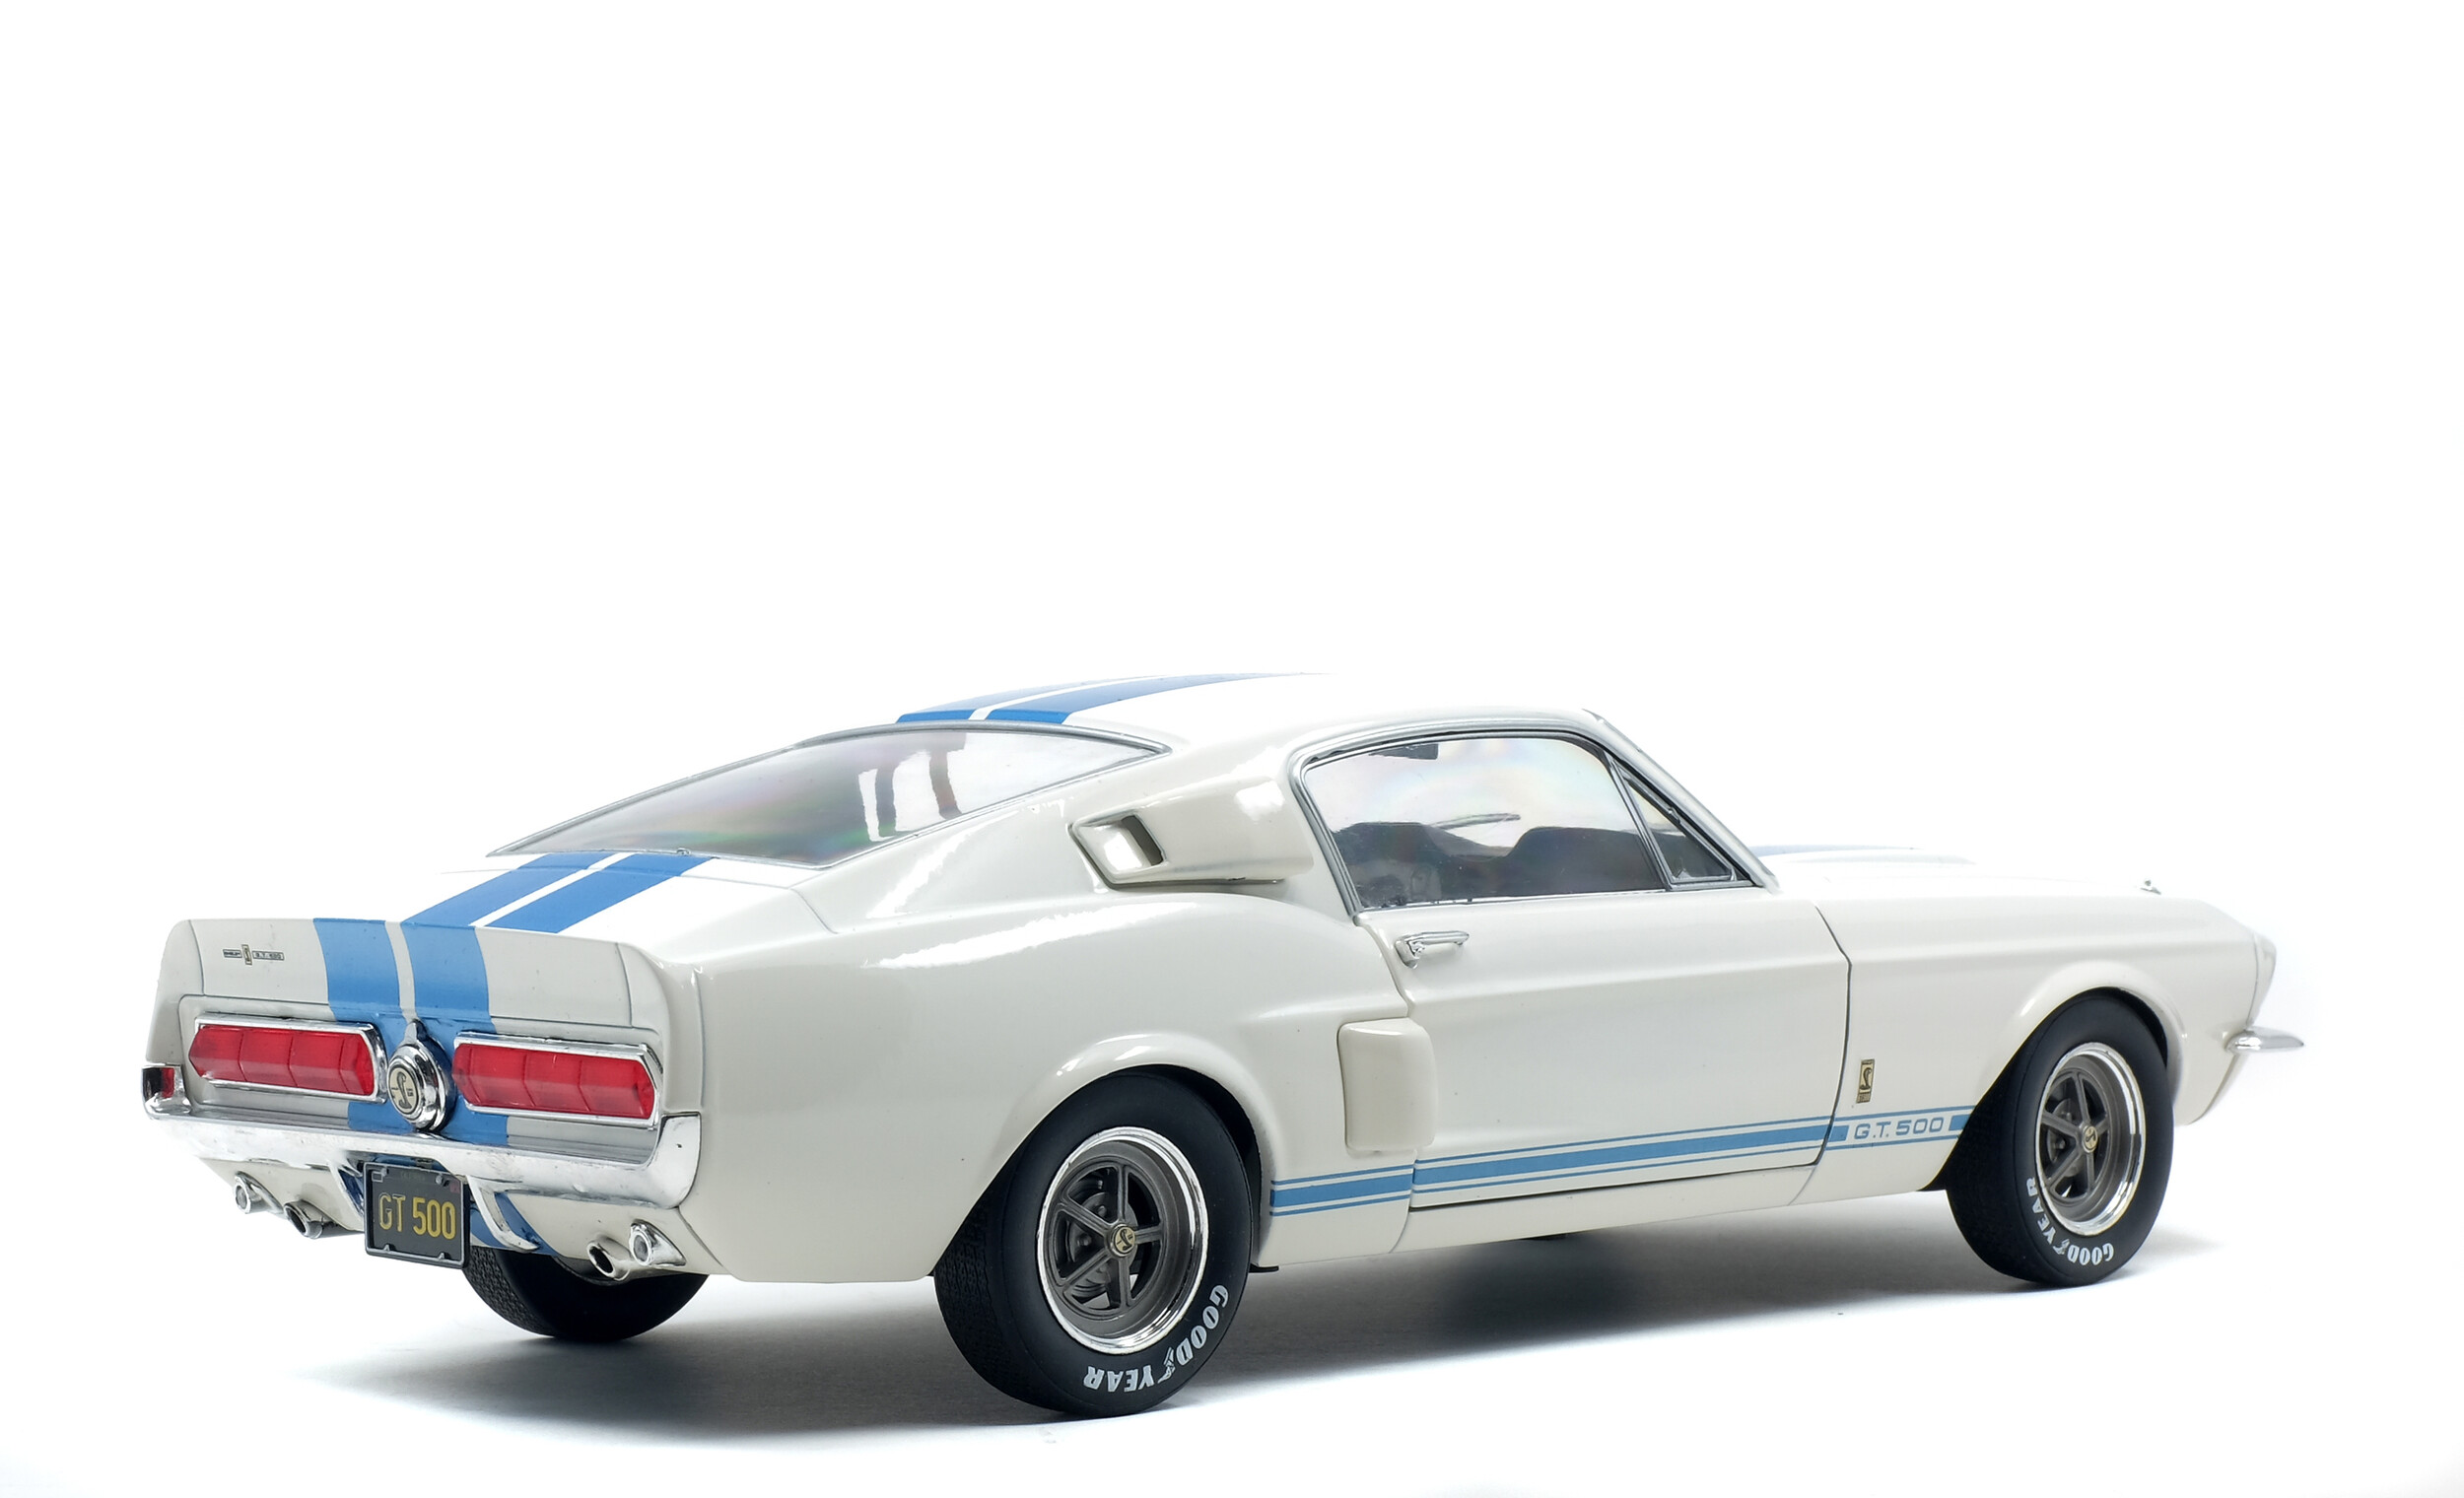 SOLIDO S1802901 1967 SHELBY MUSTANG GT 500 1/18 WHITE with BLUE STRIPES